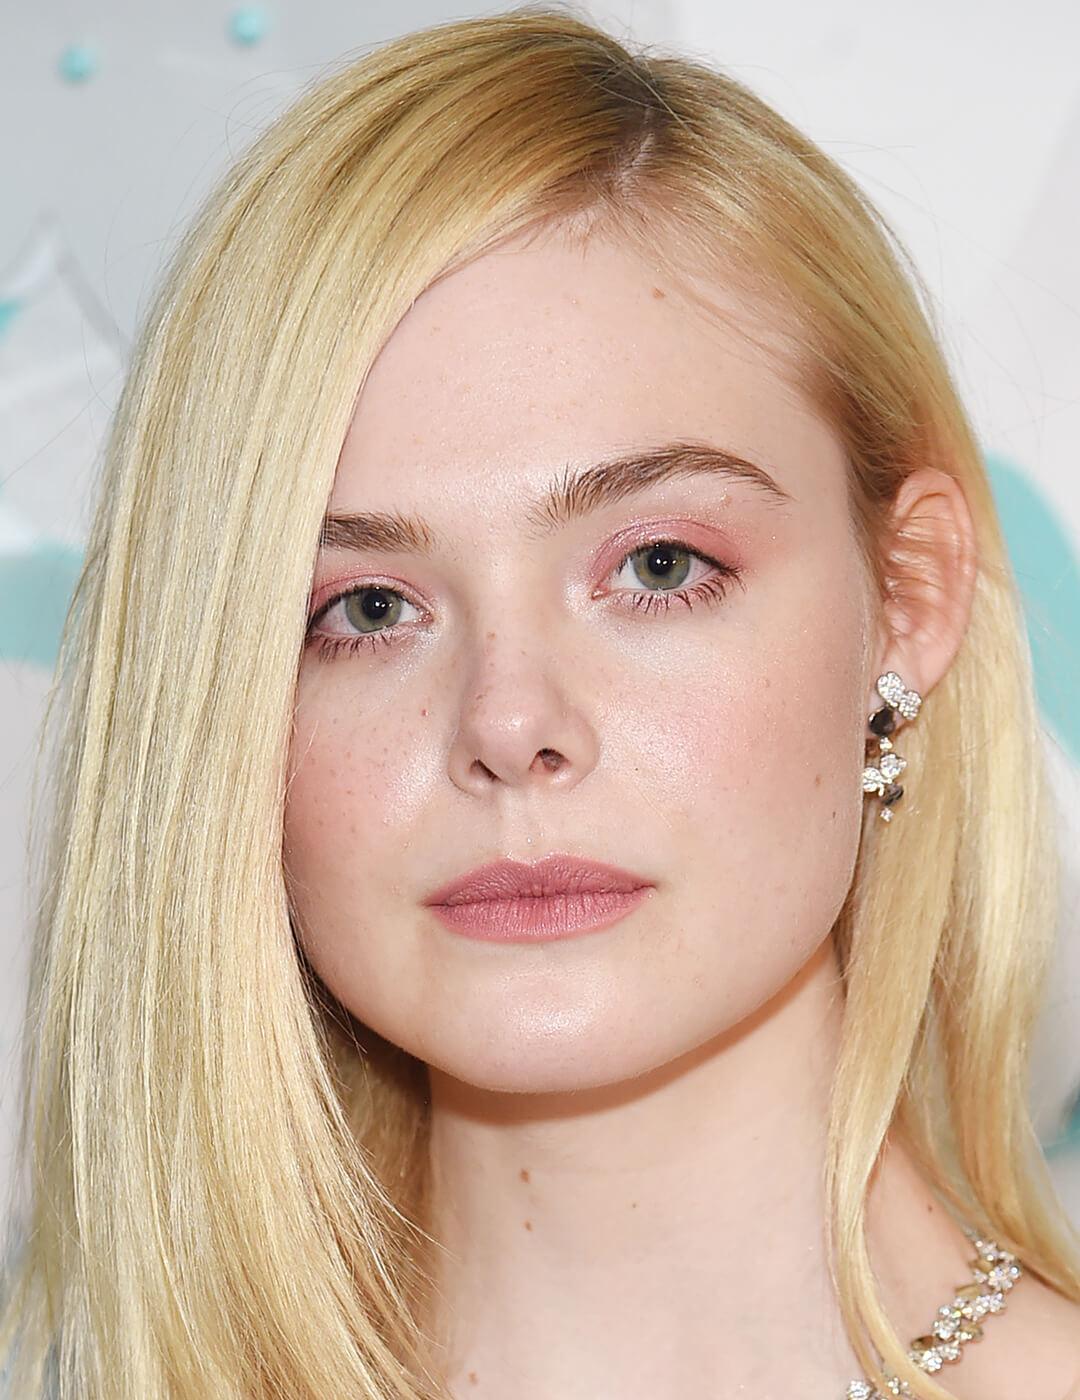 An image of Elle Fanning looking fierce in her pink eyeshadow and lipstick with hair tucked in on one side